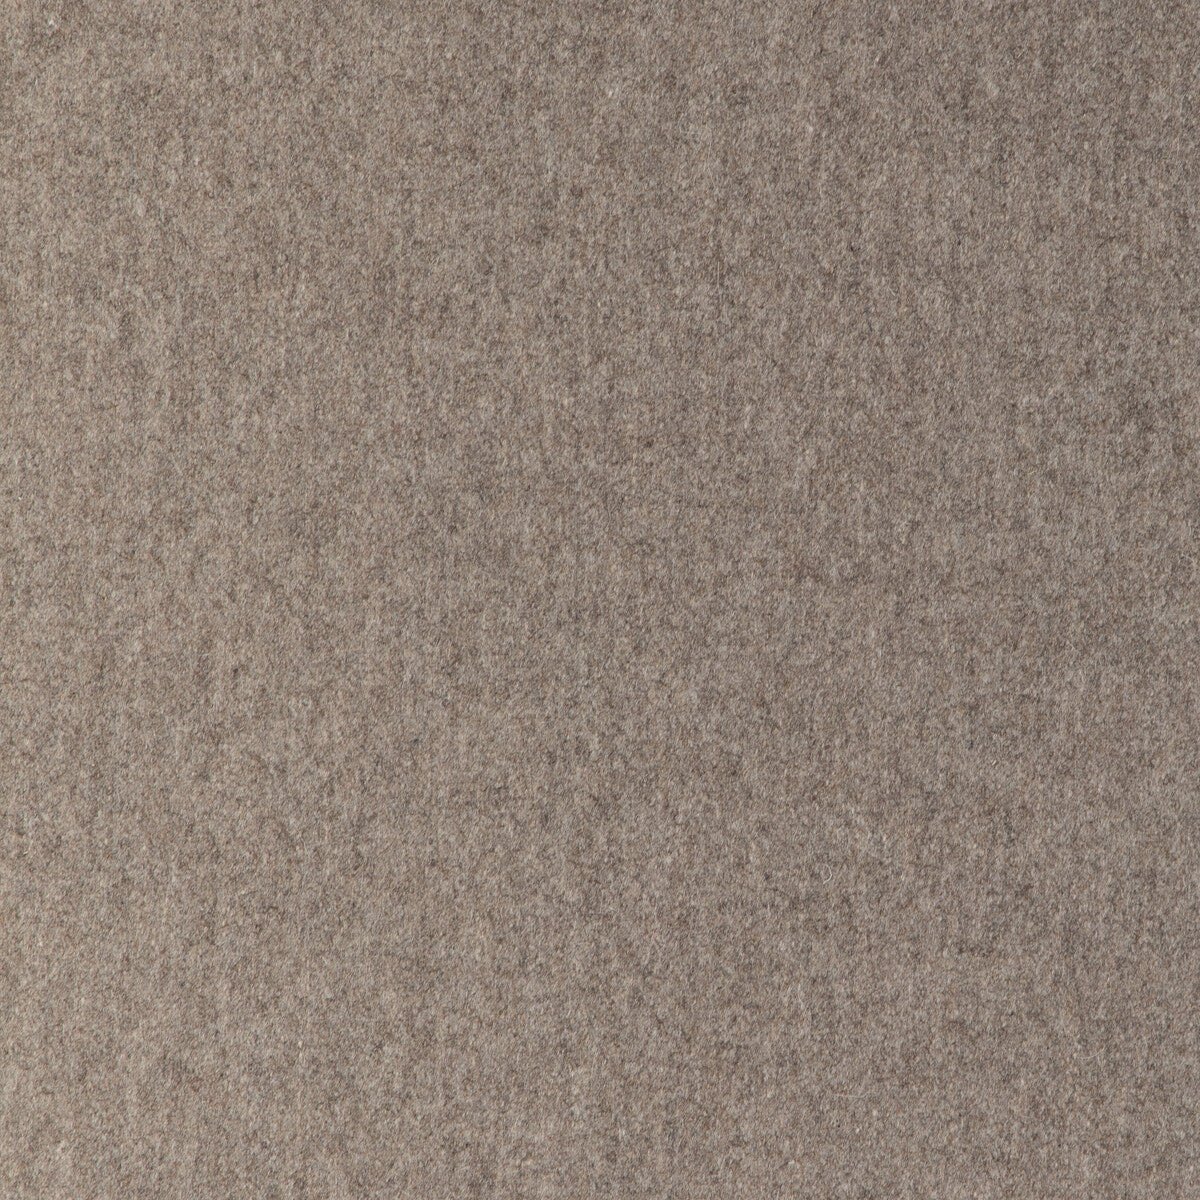 Jefferson Wool fabric in antler color - pattern 34397.106.0 - by Kravet Contract